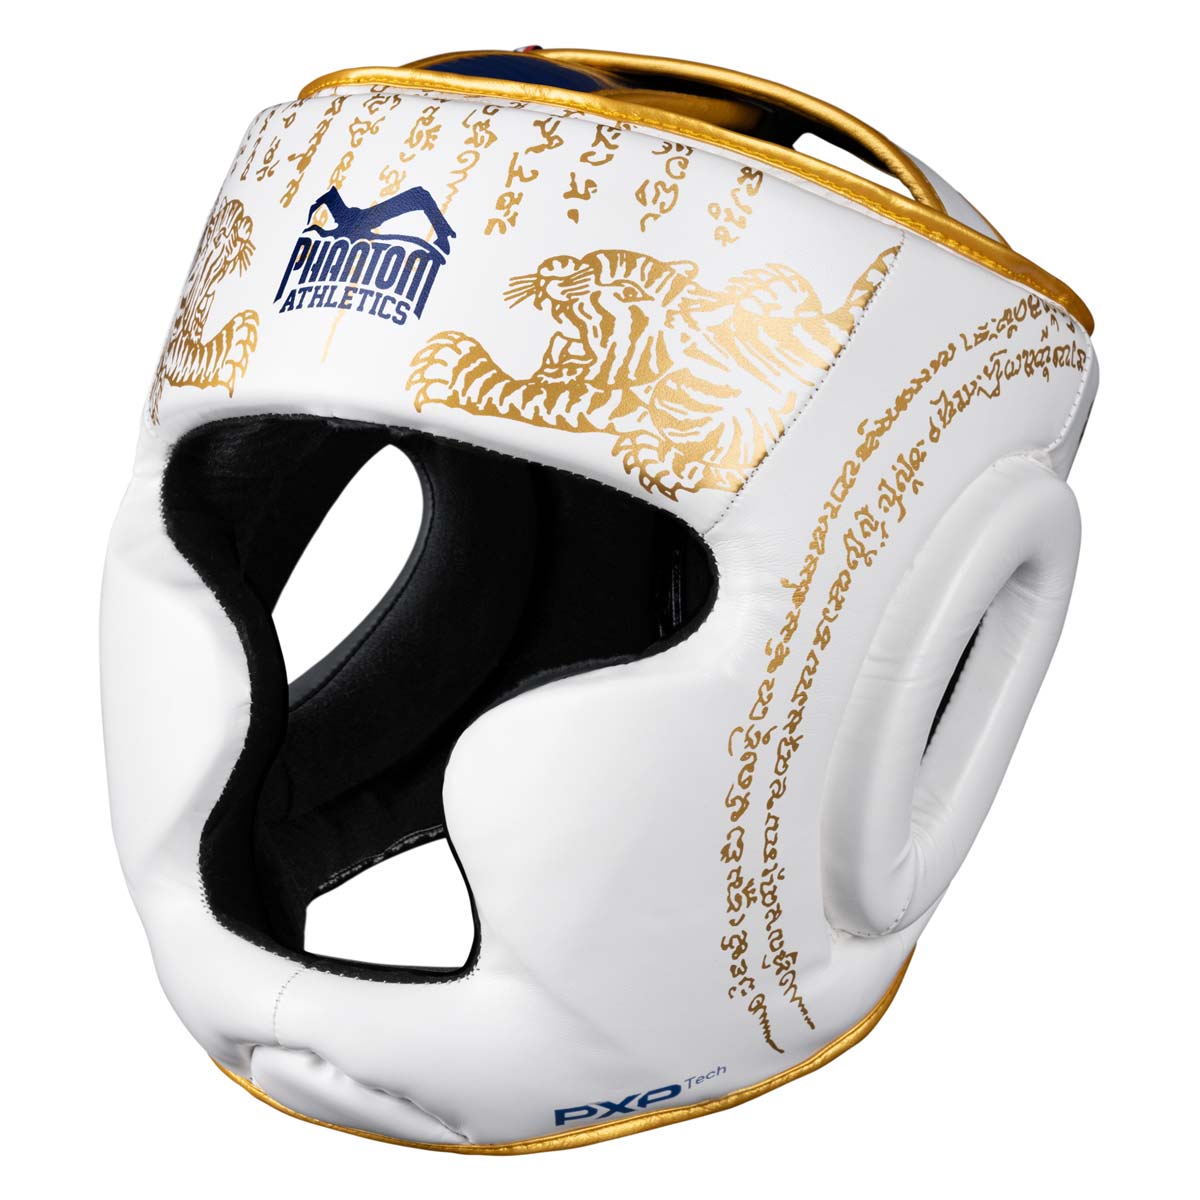 Phantom Muay Thai head protection for Thai boxing and MMA sparring, competition and training. In the traditional Sak Yant design and the color white/gold.